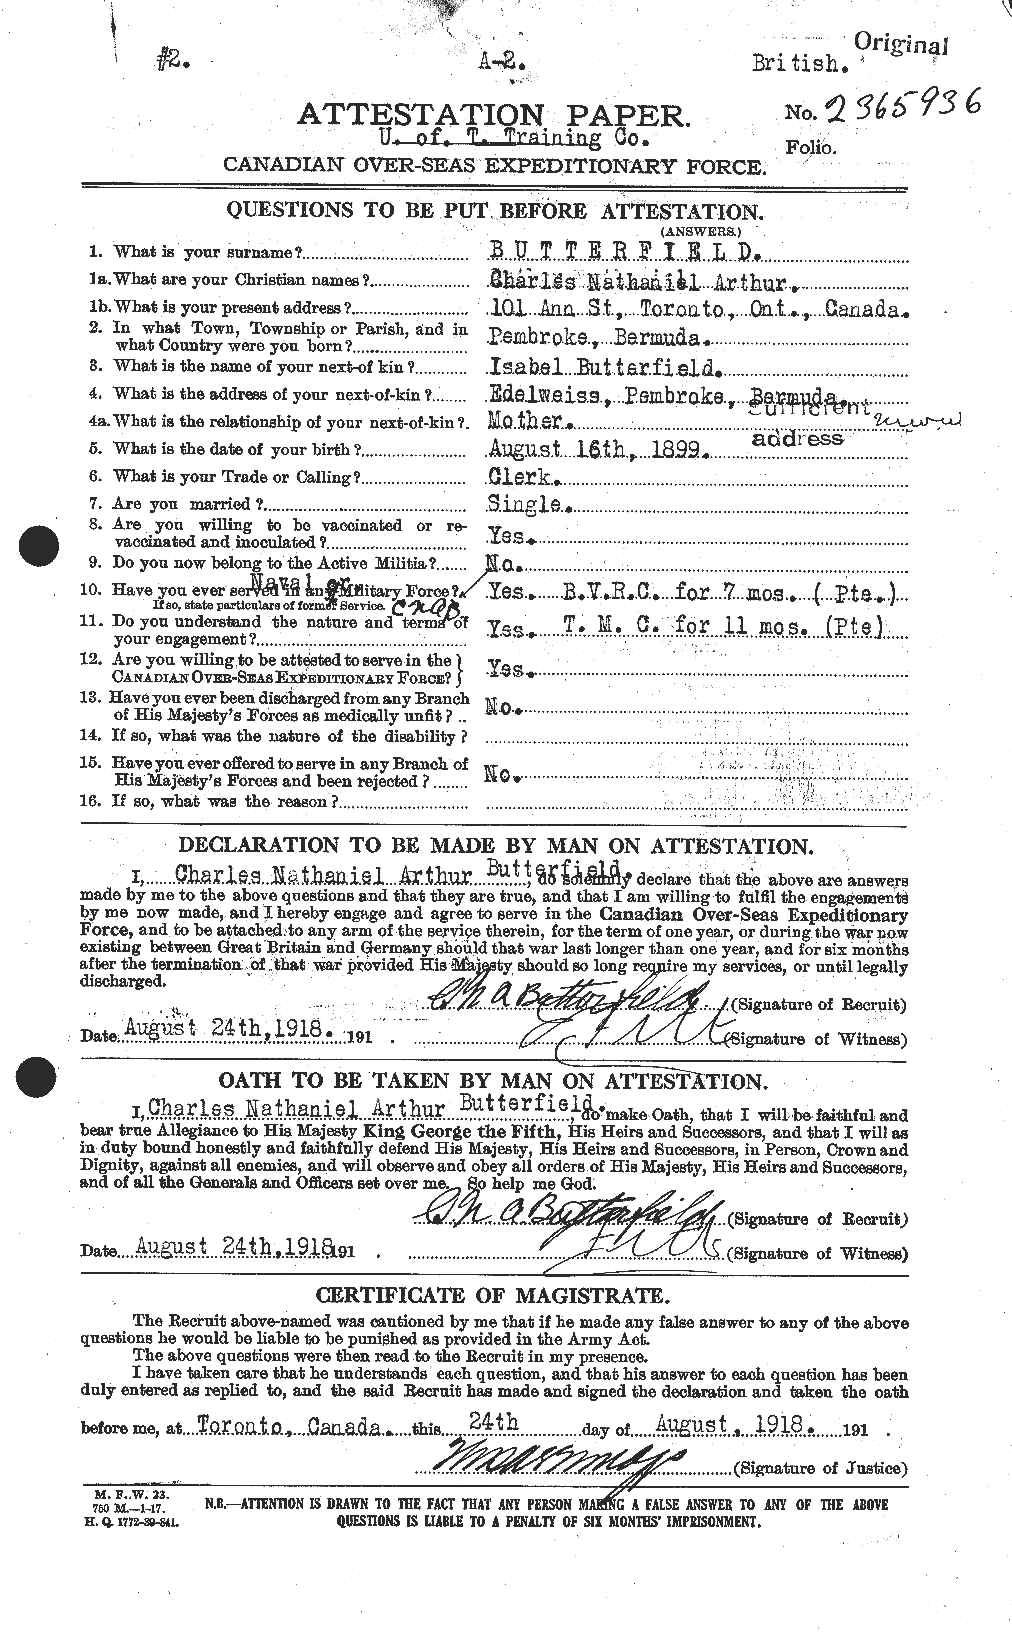 Personnel Records of the First World War - CEF 278227a